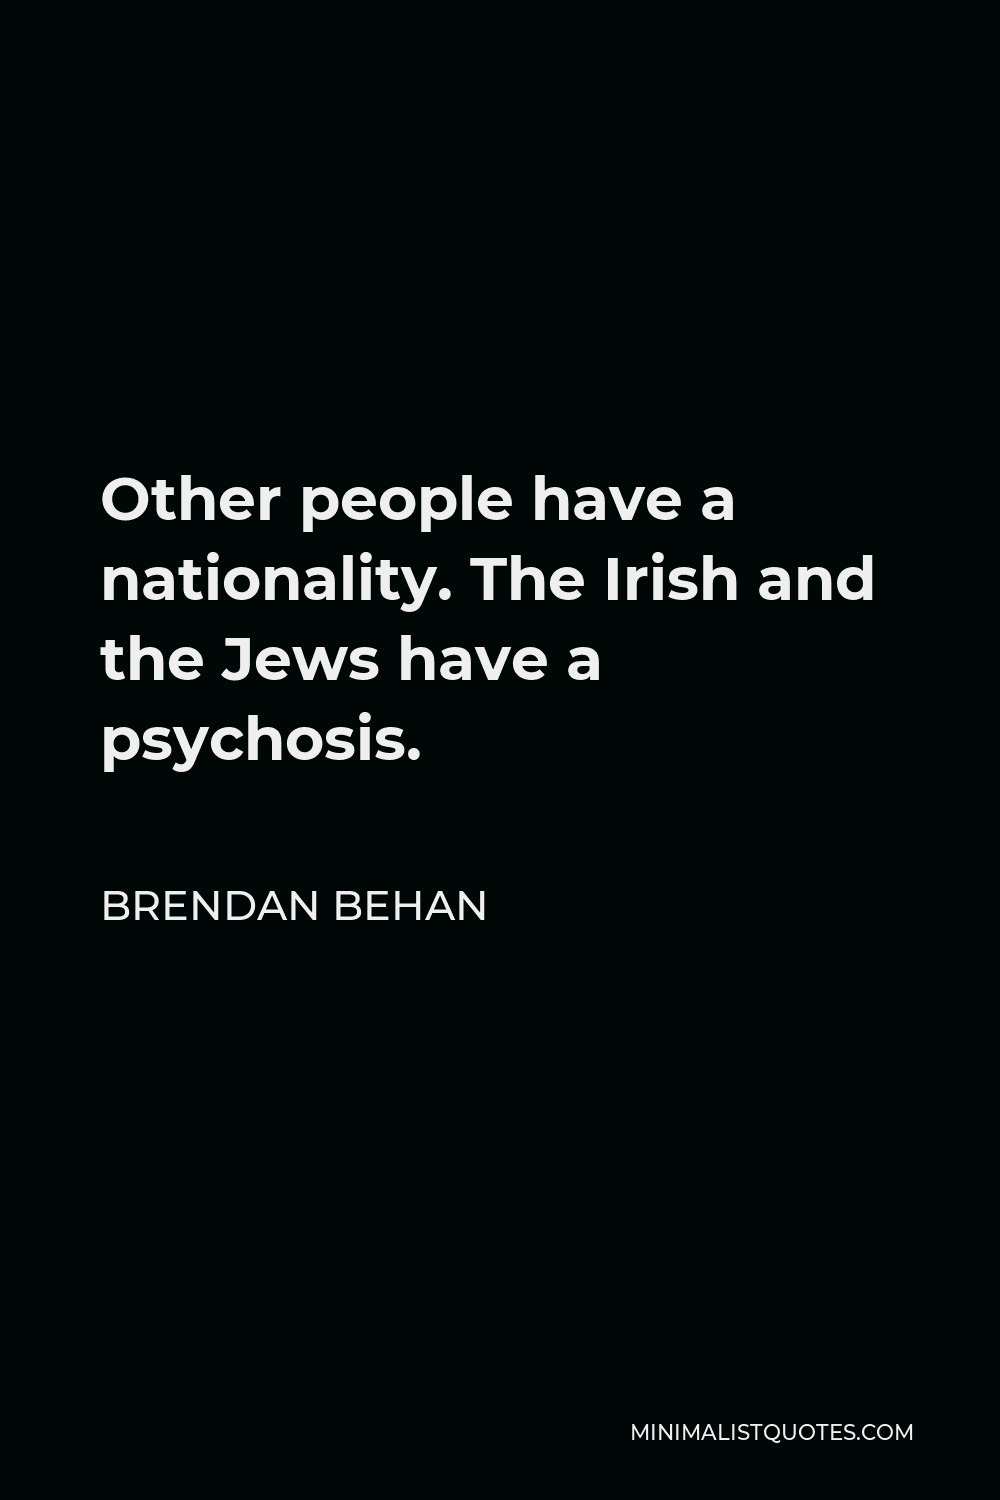 Brendan Behan Quote - Other people have a nationality. The Irish and the Jews have a psychosis.